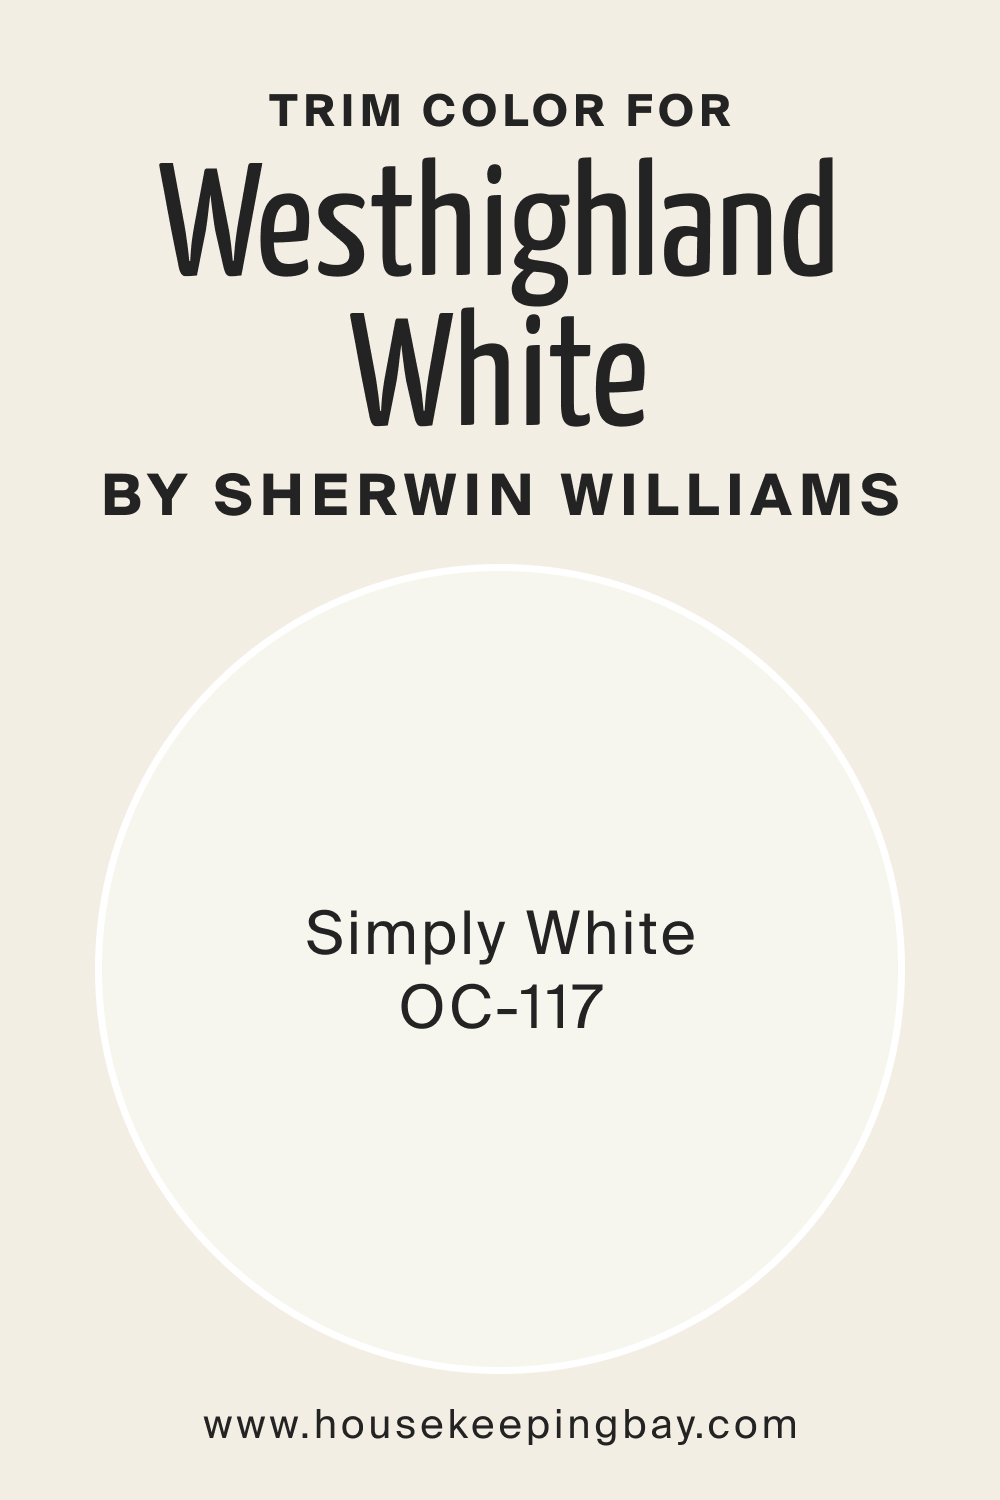 Trim Color for Westhighland White SW 7566 by Sherwin Williams